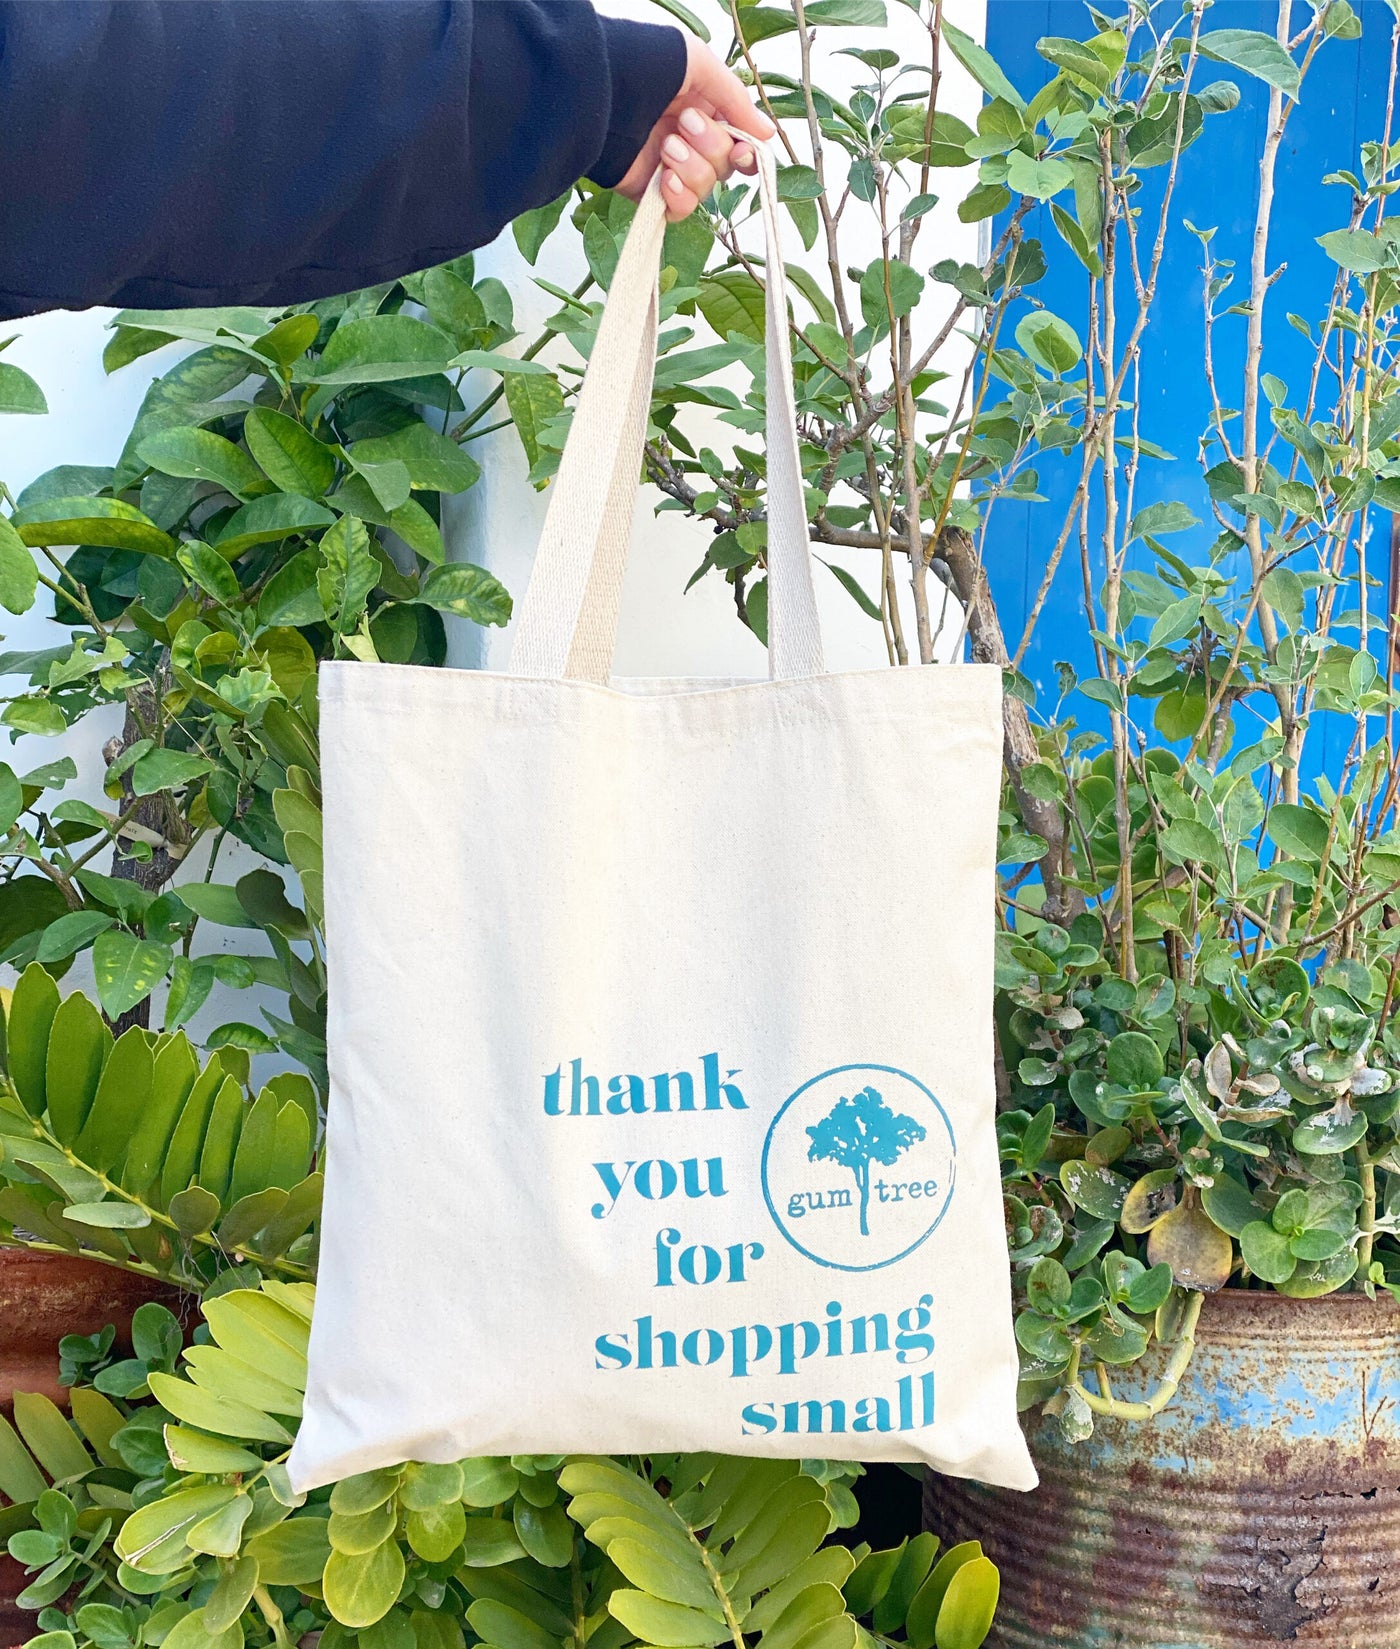 Our Totes Have Arrived!